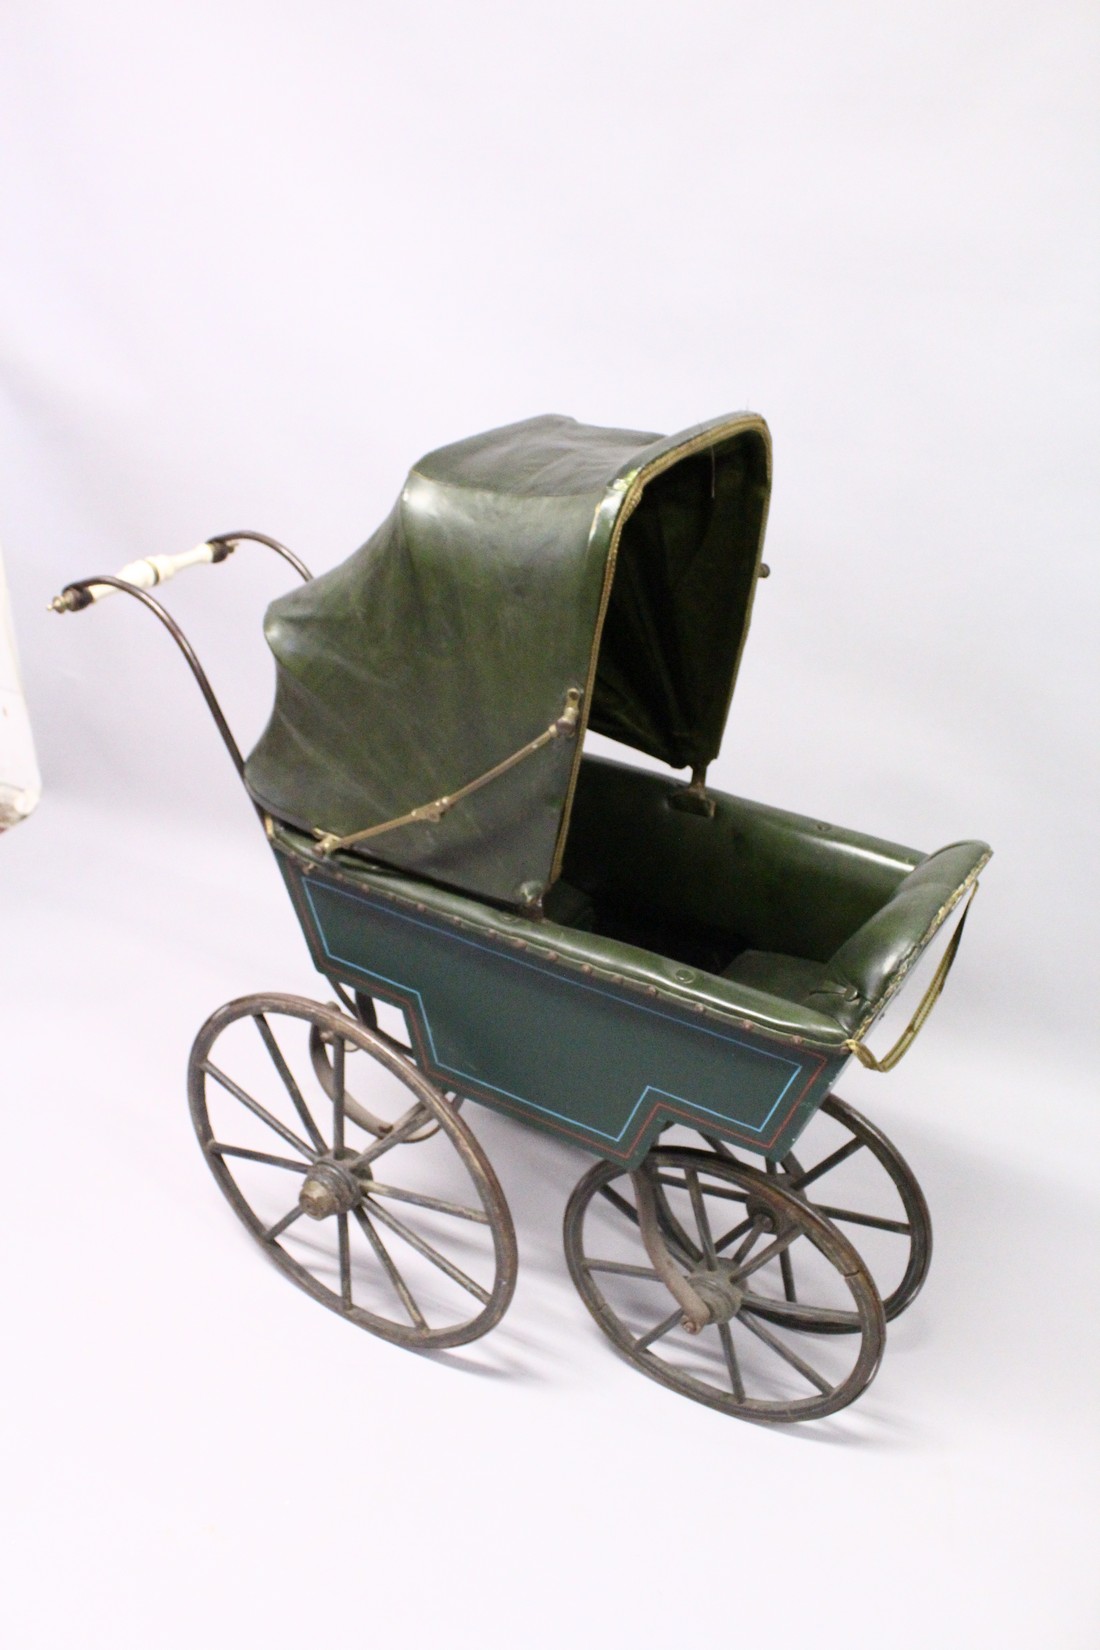 A RARE VICTORIAN METAL, WOOD AND LEATHER PRAM with folding hood, porcelain handles, wooden wheels. - Image 3 of 7